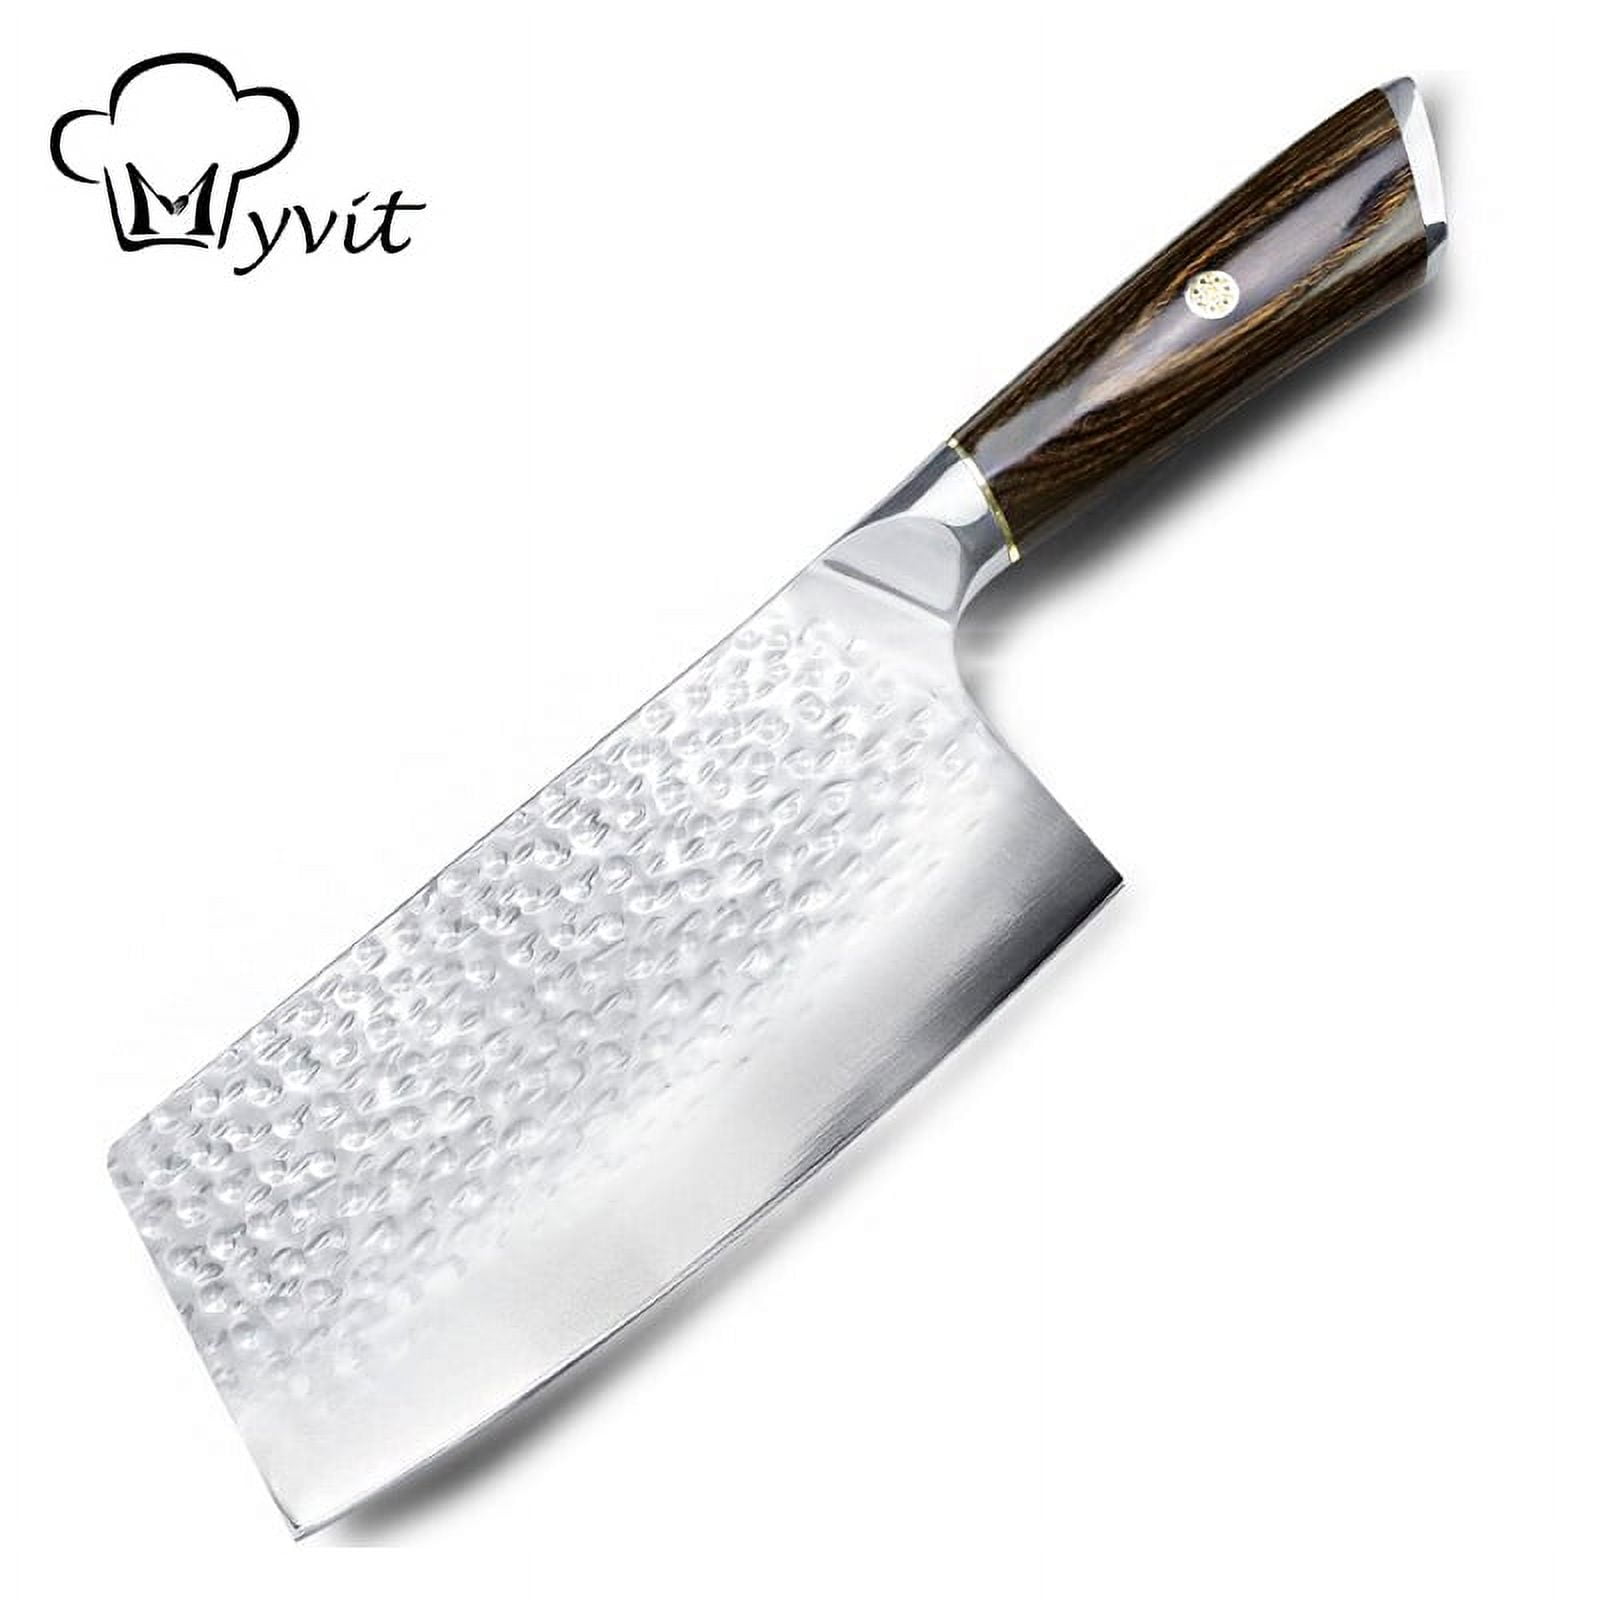 Cleaver Stainless Steel 15 cm with Black Handle